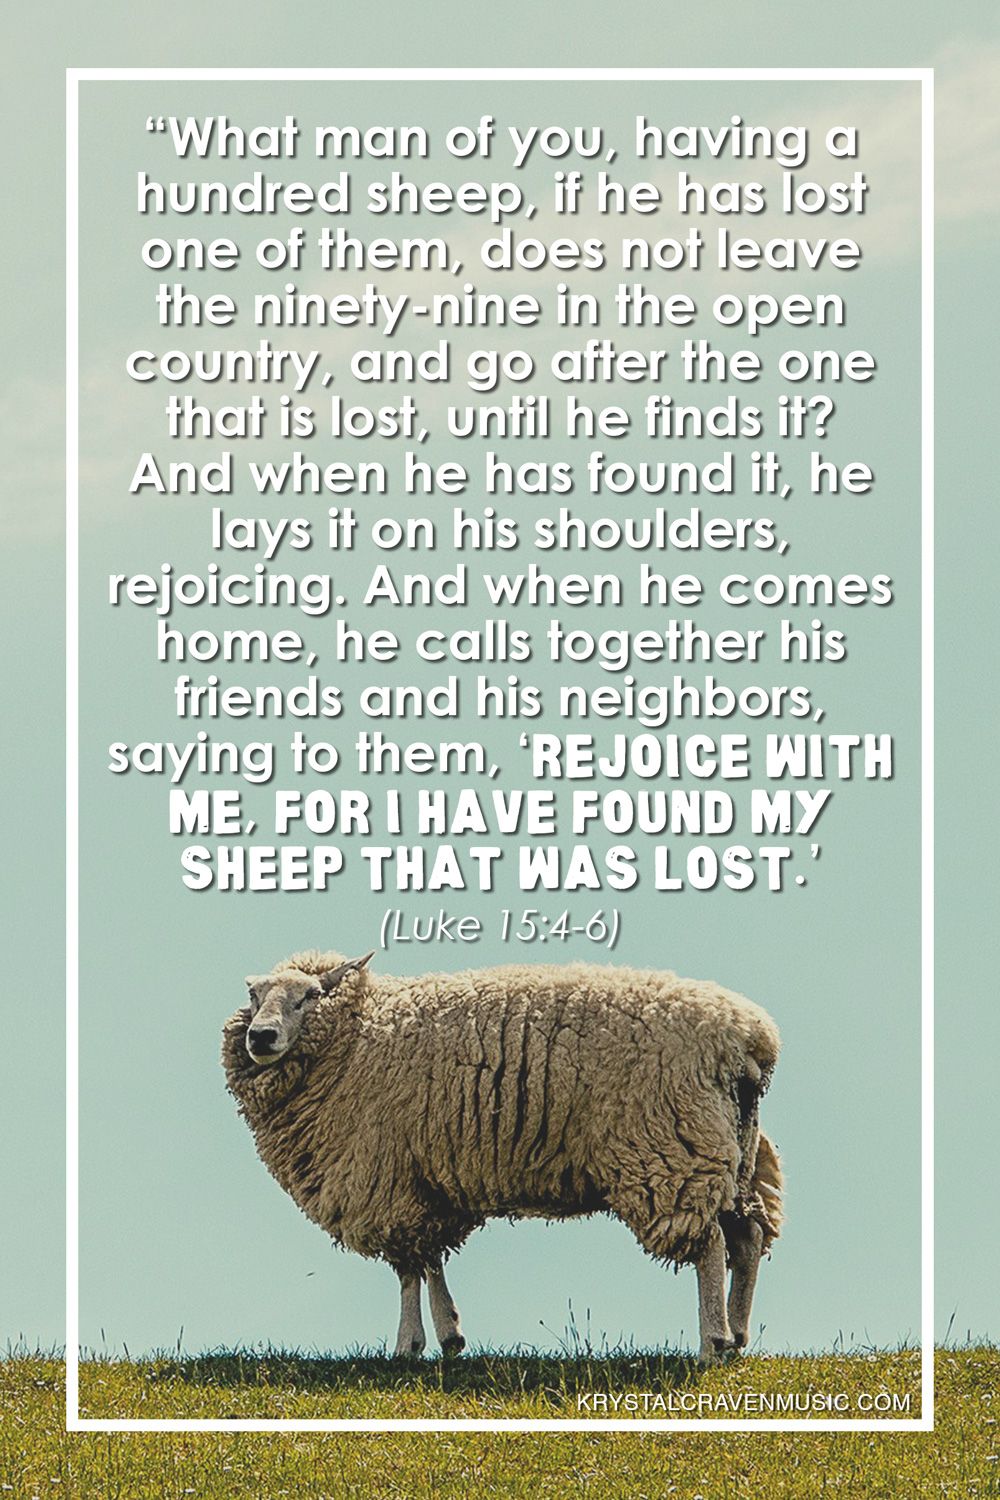 The text from Luke 15:4-6 that reads "“What man of you, having a hundred sheep, if he has lost one of them, does not leave the ninety-nine in the open country, and go after the one that is lost, until he finds it? And when he has found it, he lays it on his shoulders, rejoicing. And when he comes home, he calls together his friends and his neighbors, saying to them, ‘Rejoice with me, for I have found my sheep that was lost.’" over a sheep standing in a field with overgrown and matted wool.